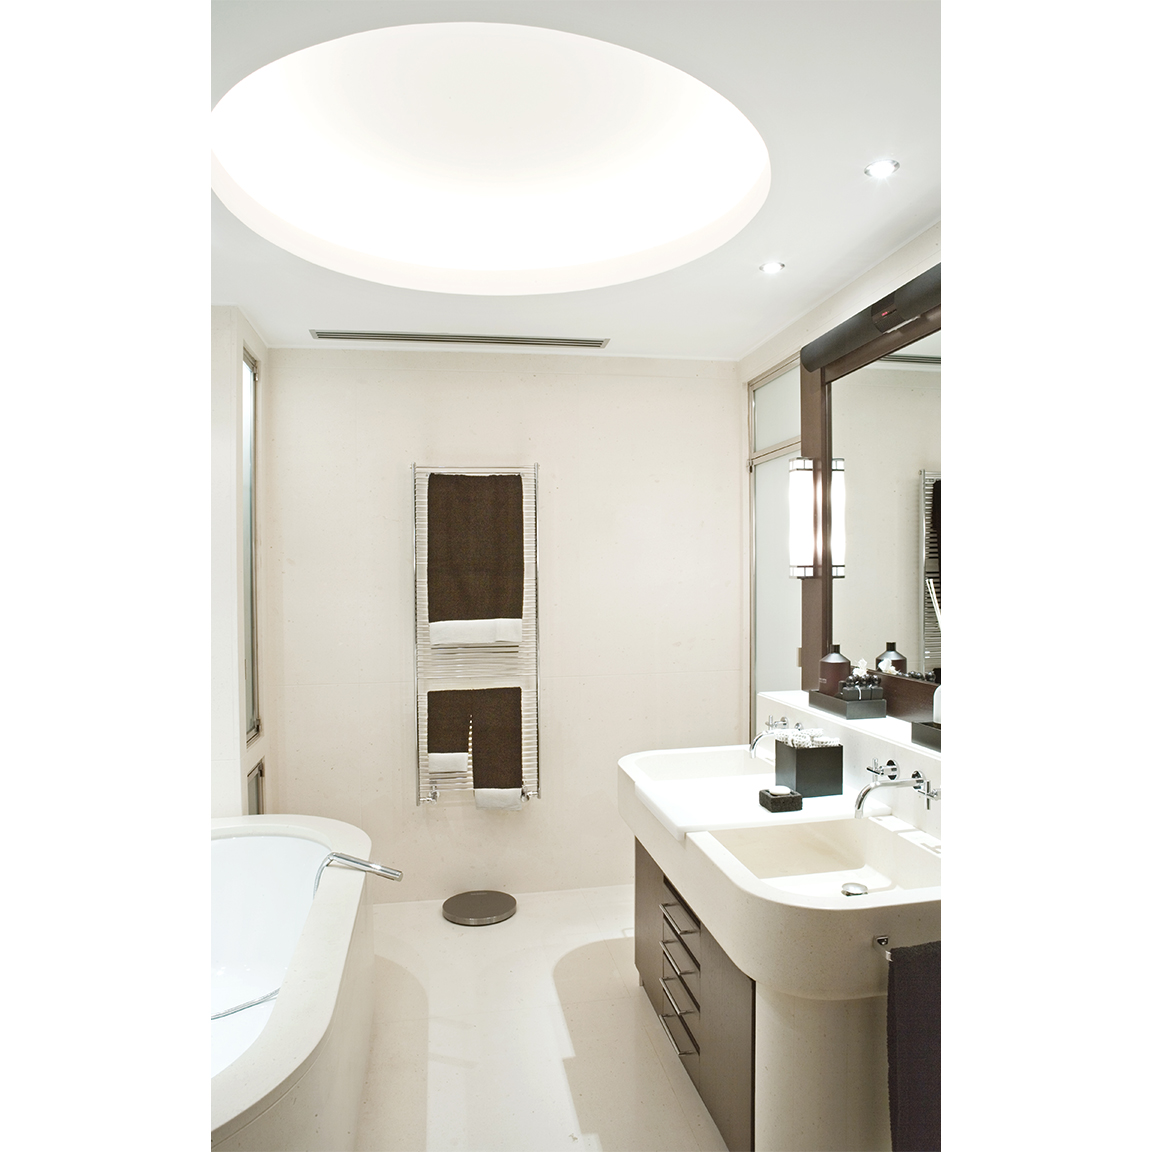 white stone bathroom with circular ceiling